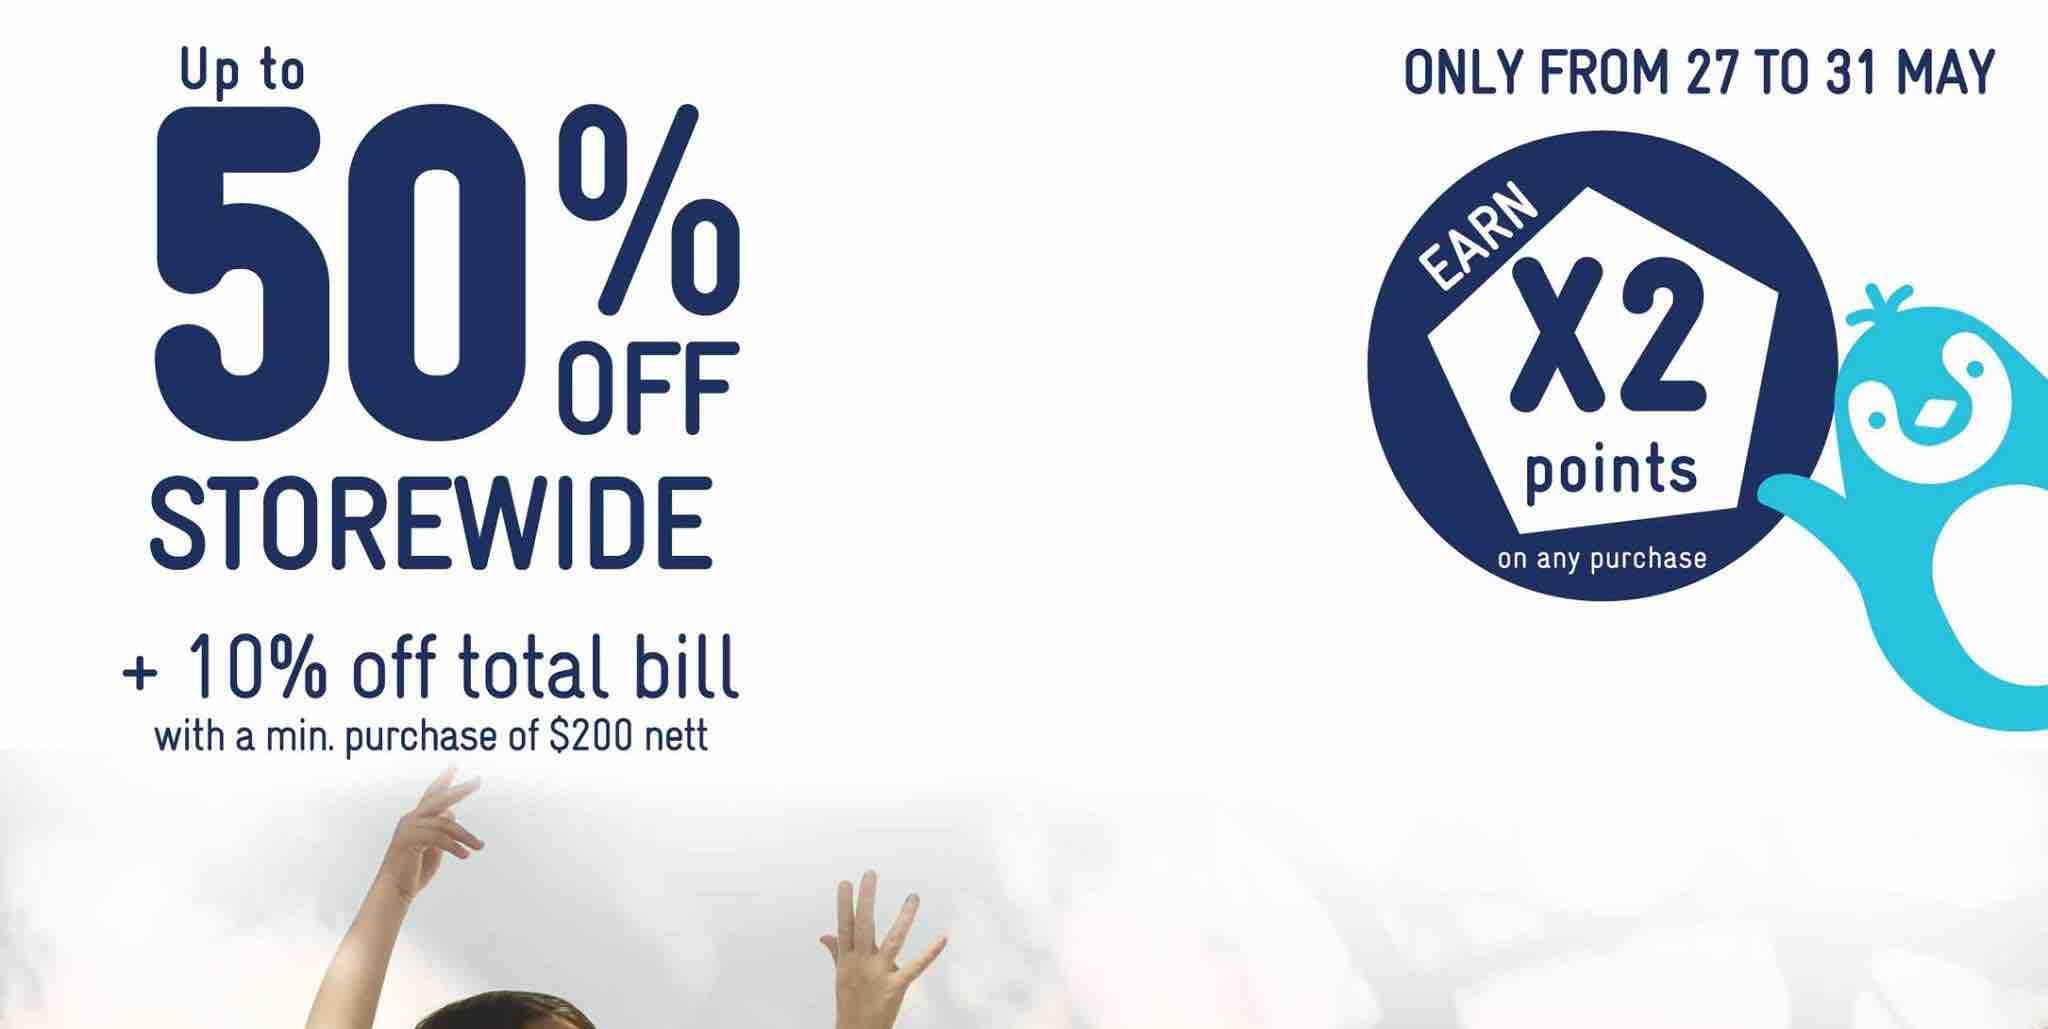 Petit Bateau Great Singapore Sale Up to 50% Off Storewide Promotion 27-31 May 2017